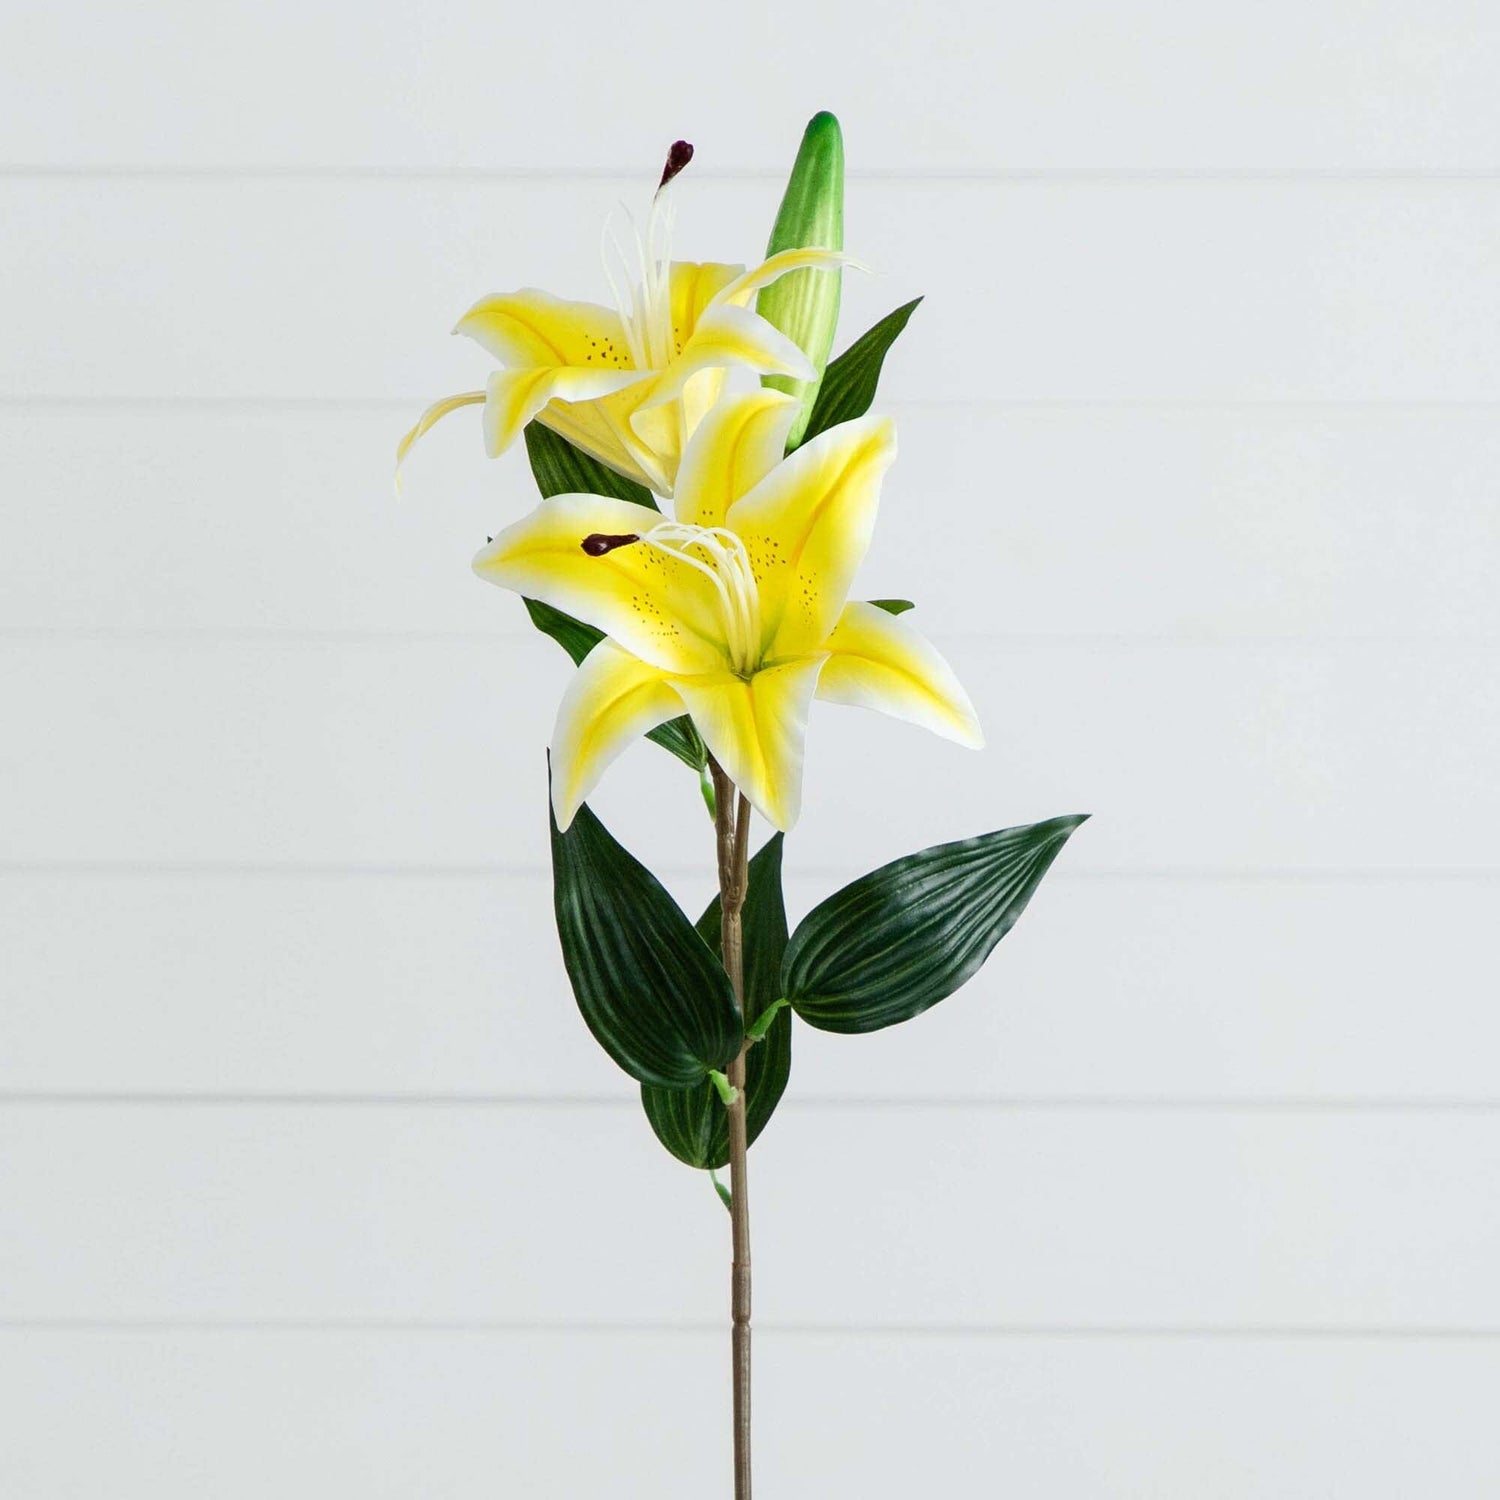 31" Artificial Lily Flower Stems - Set of 3